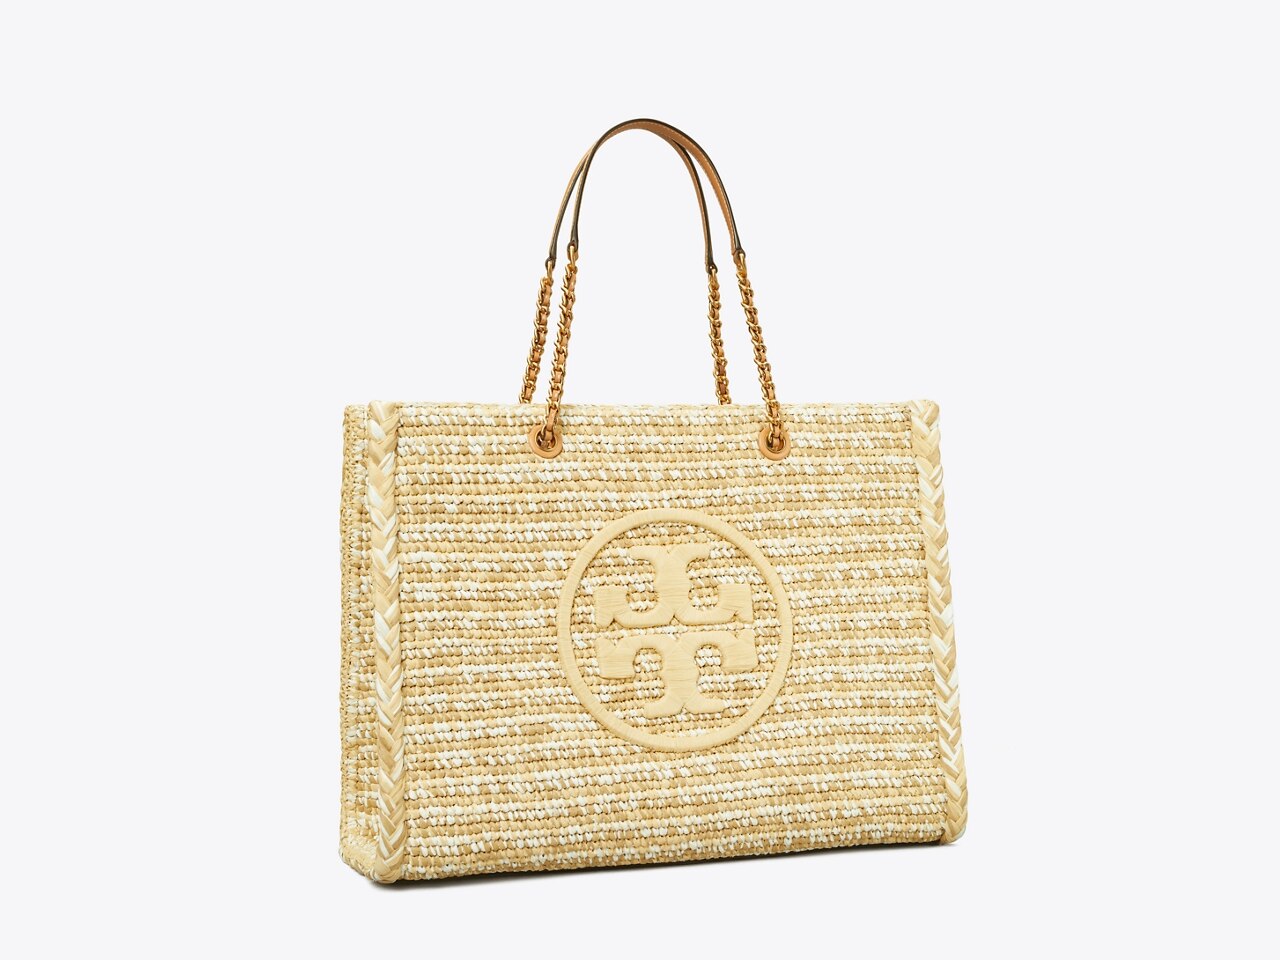 Tory Burch Leather And Raffia Bucket Bag in Natural